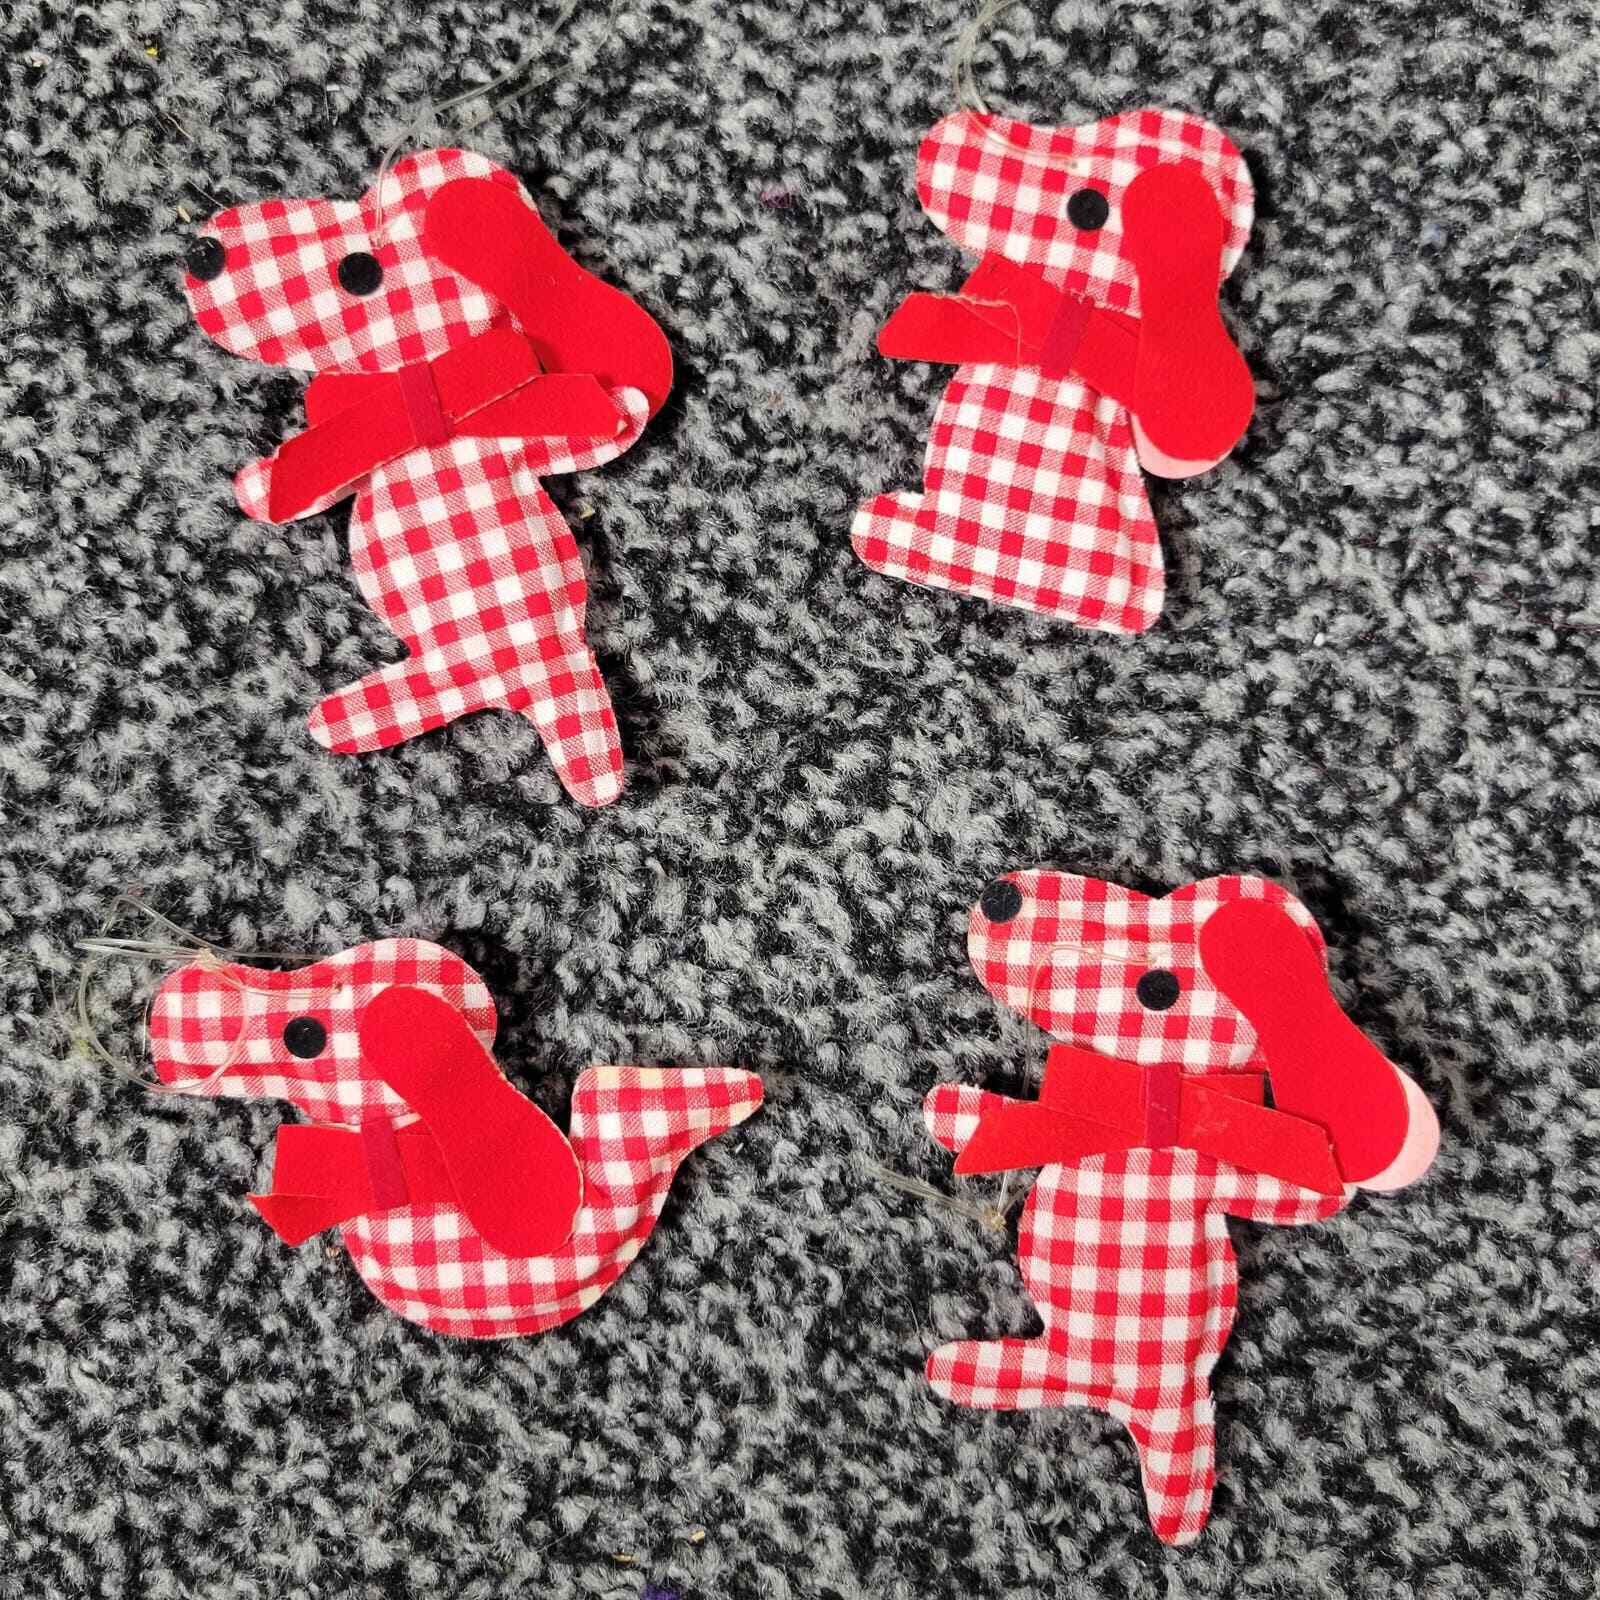 Vintage Red & White Gingham Dog Christmas Ornaments, set of 4